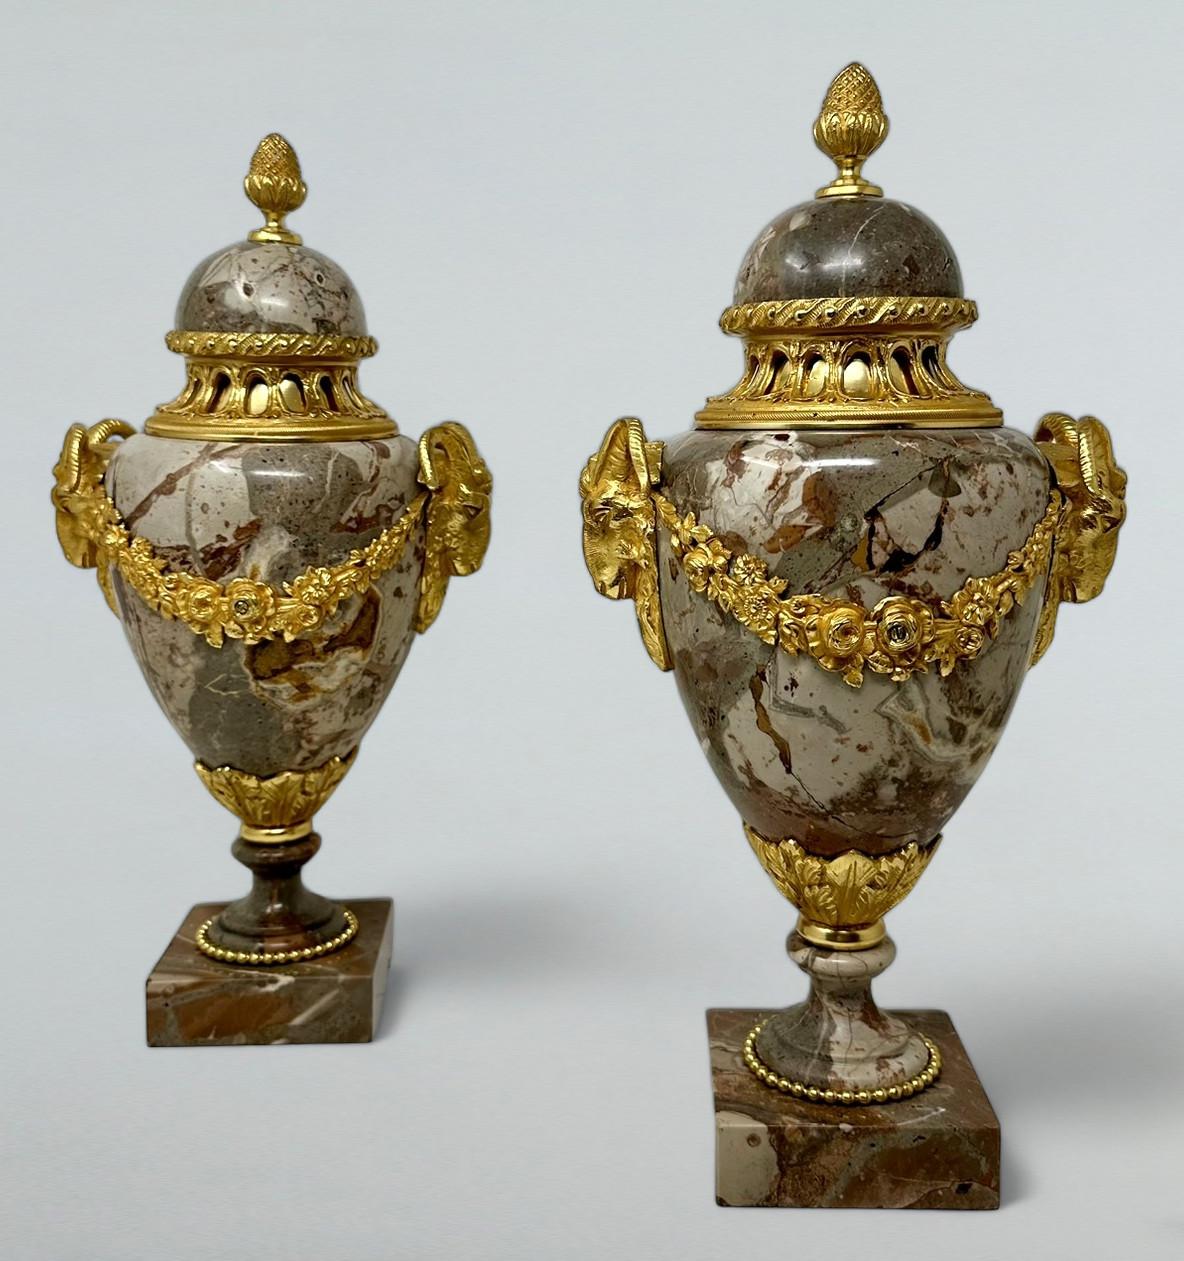 Stunning Example of a pair of French Ormolu mounted well veined Sarrancolin or Brecca Africano Marble Twin Handle Urns of museum quality, after a model by Lean Julienne (1686-1766). Mid to late Nineteenth Century.  

Each exquisitely surmounted by a